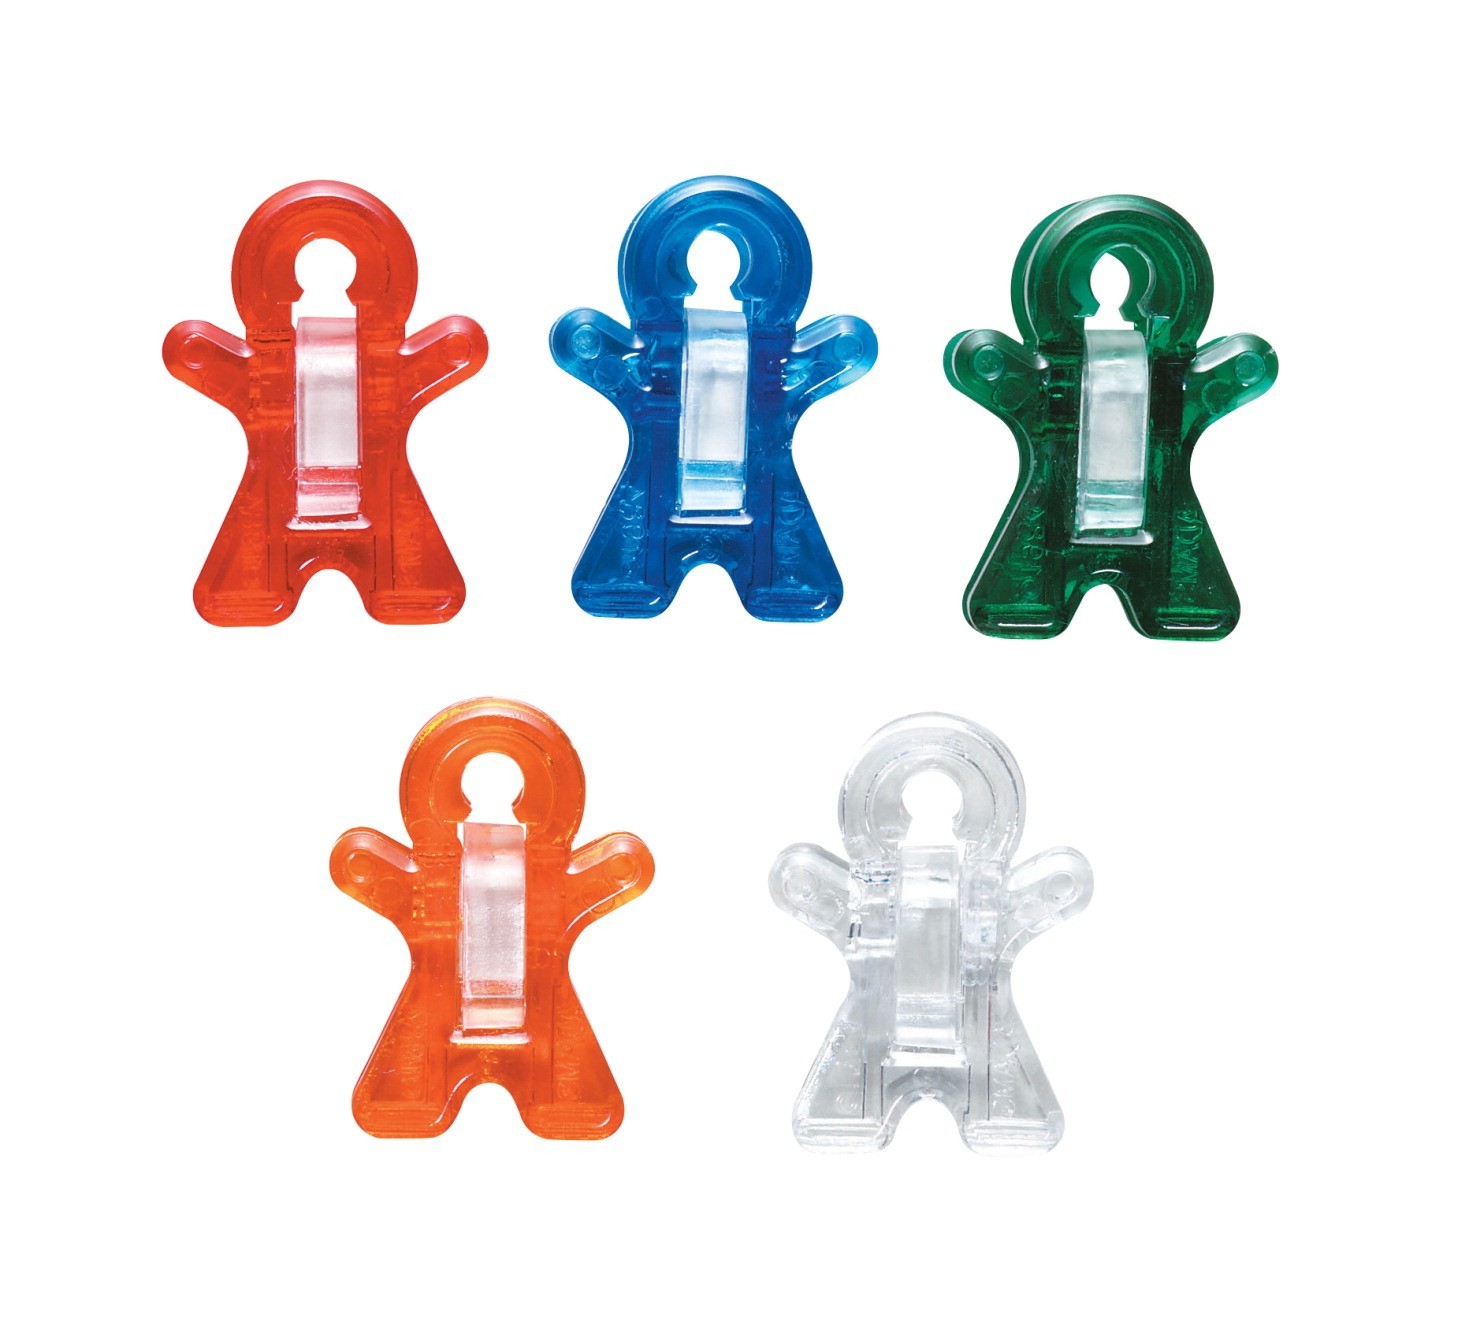 Mini Magnet Man Clips, Heavy Duty, Assorted Colors, Translucent, 1-3/8 X 1 In. - 10/Pkg